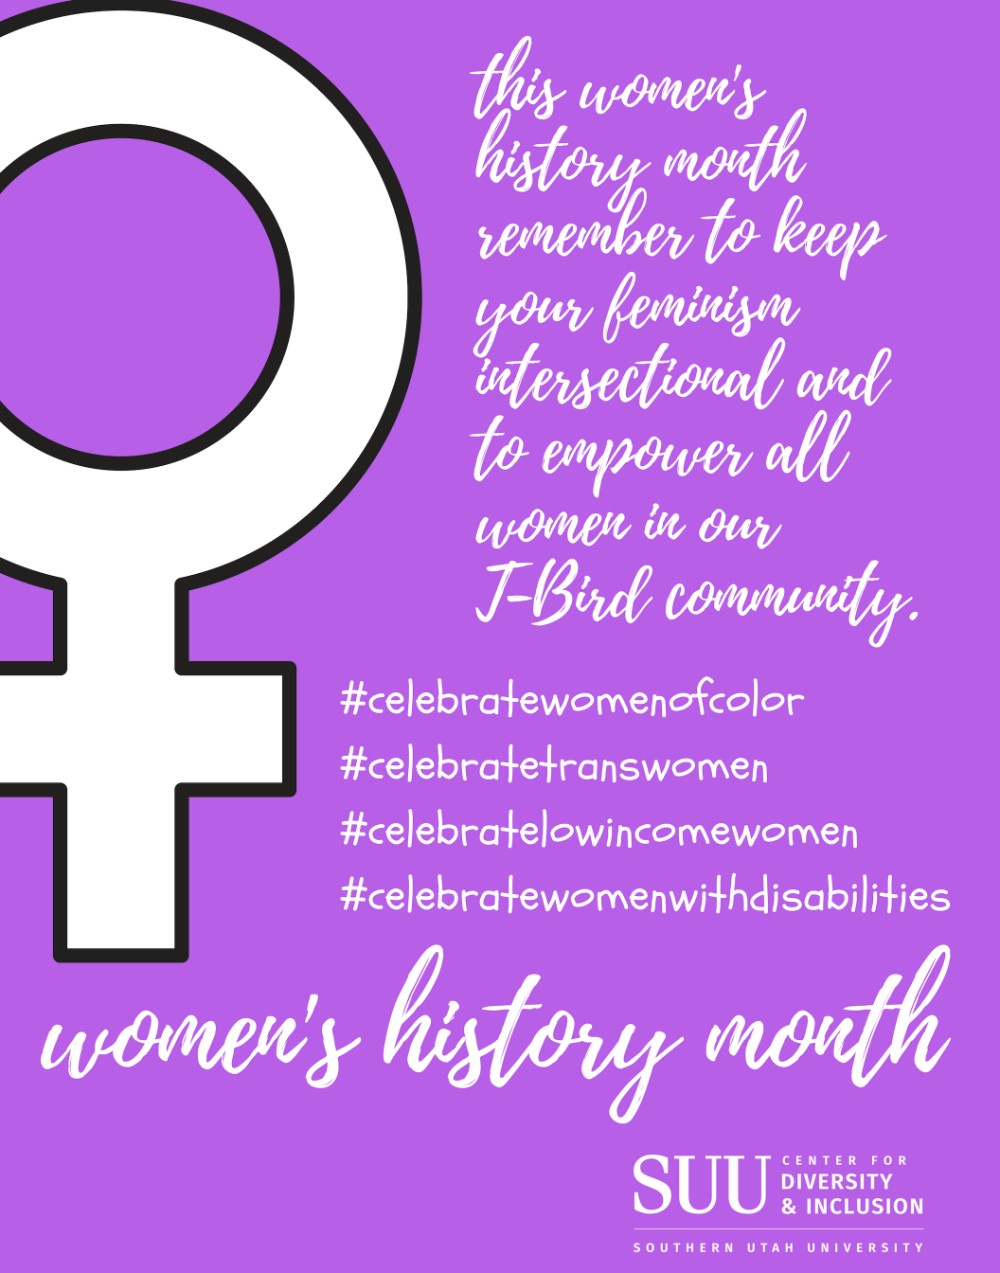 Women's History Month. This Women's history month, remember to keep your feminism intersectional and to empower all women in ou T-Bird community. Celebrate Women of Color. Celebrate Trans Women. Celebrate Low Income Women. Celebrate Women with Disabilities.